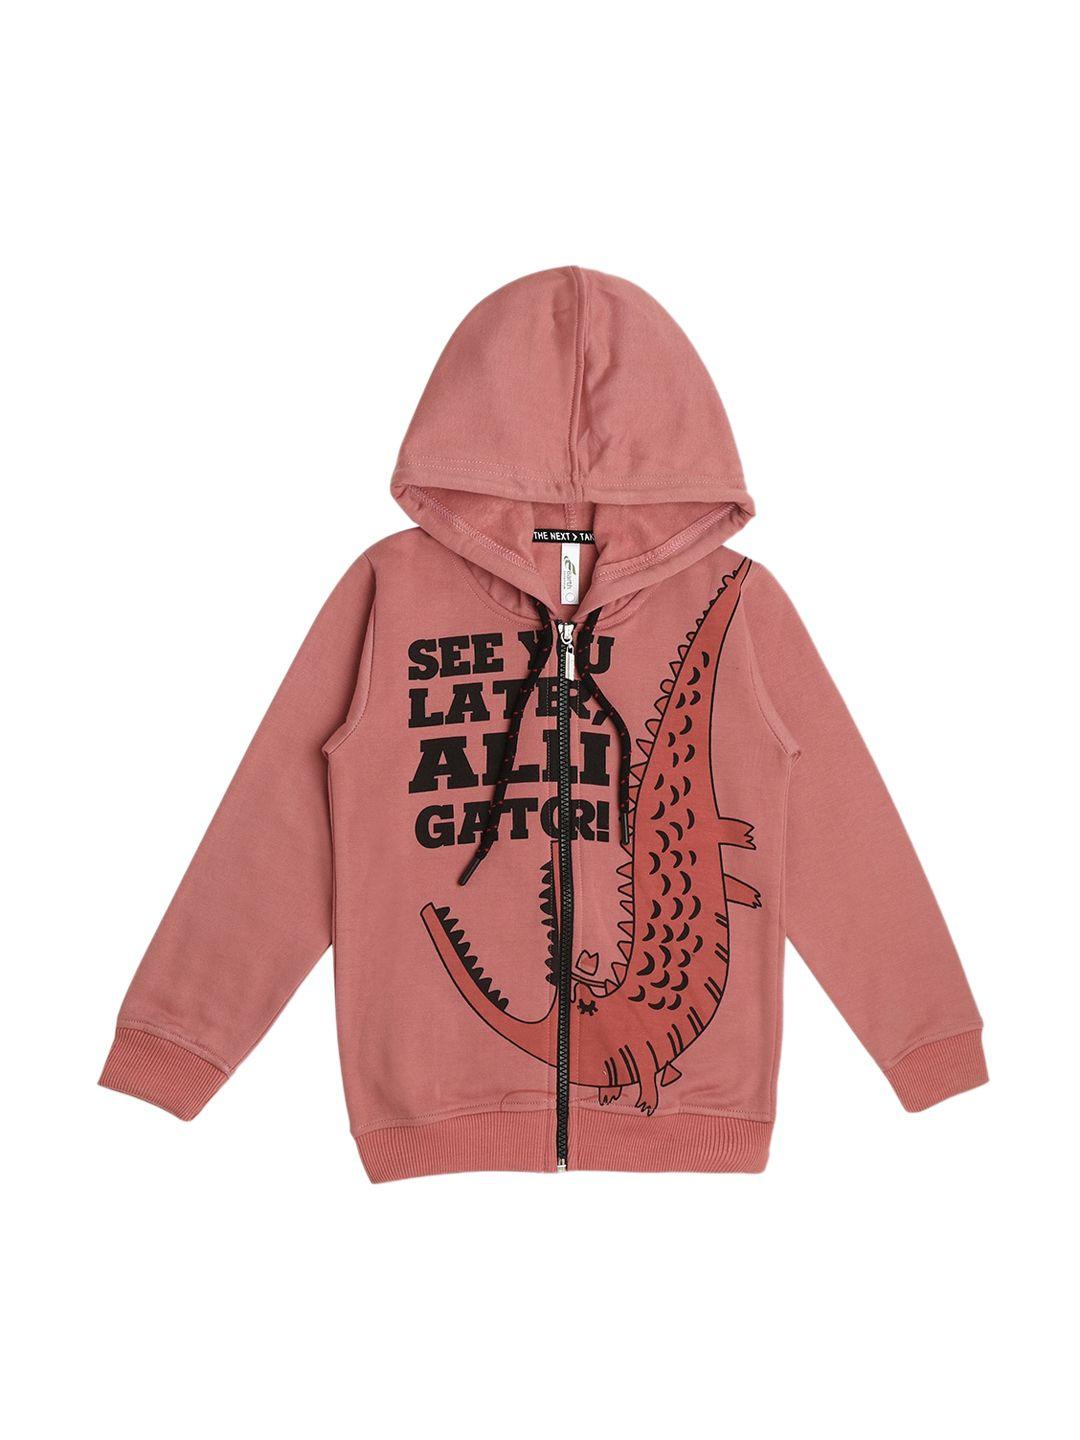 earth conscious boys typographic printed hooded fleece bomber jacket